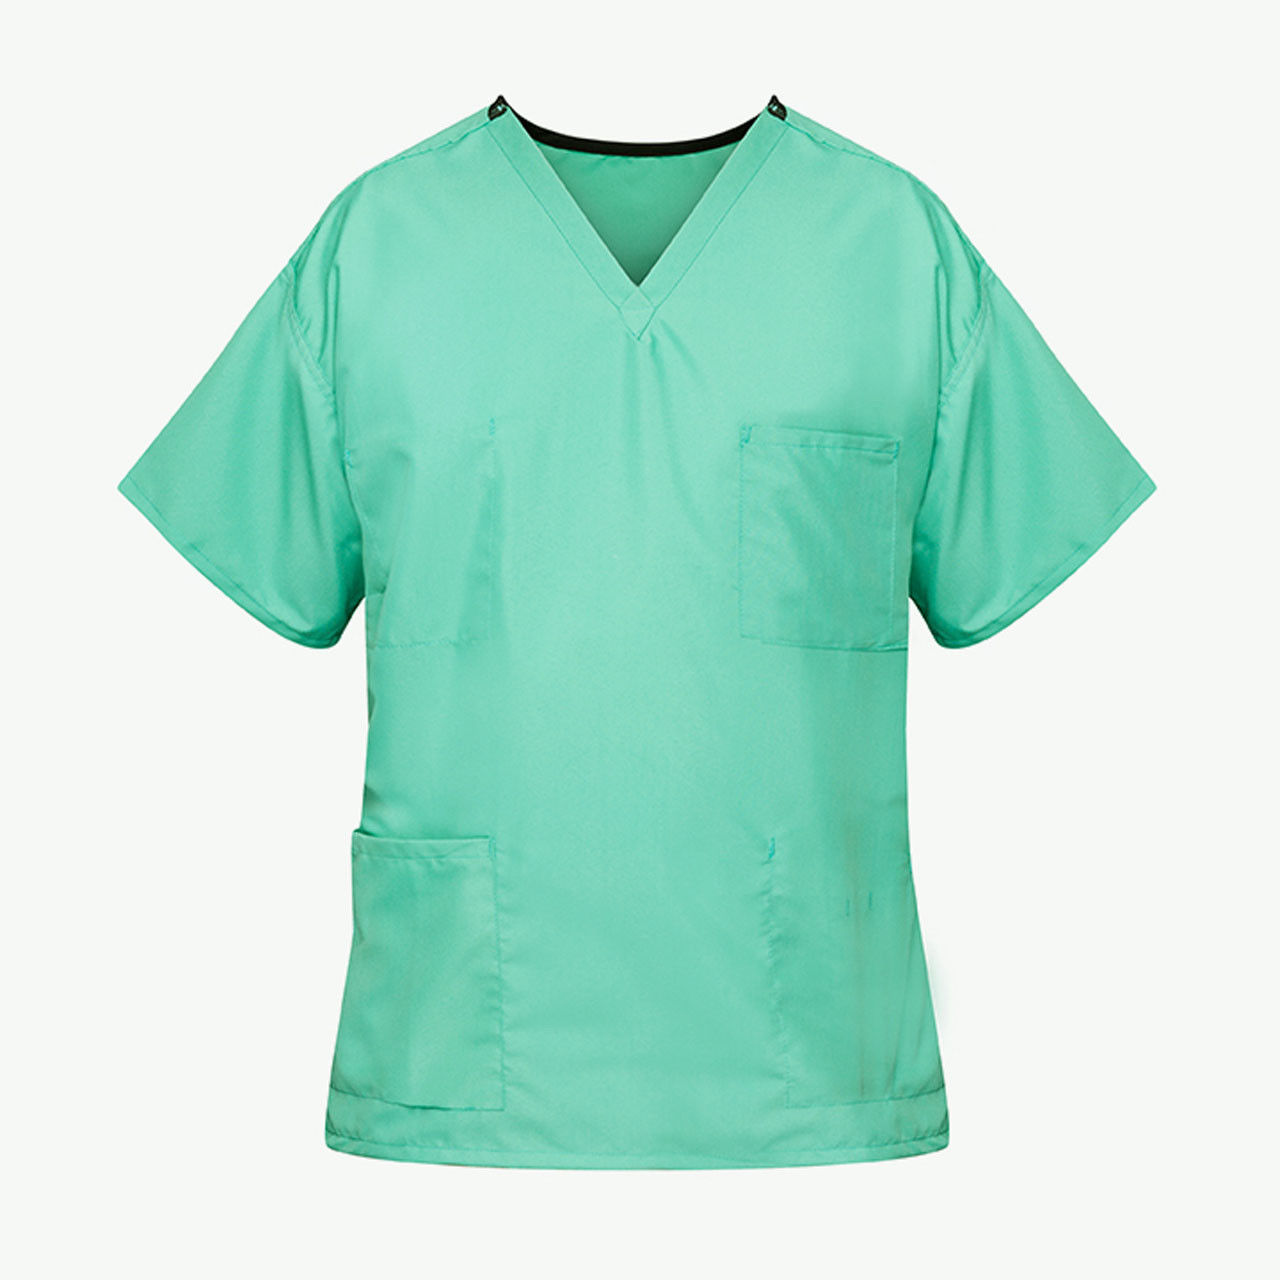 What features does the High-quality Poplin Unisex Reversible Jade Green Scrub Tops offer?